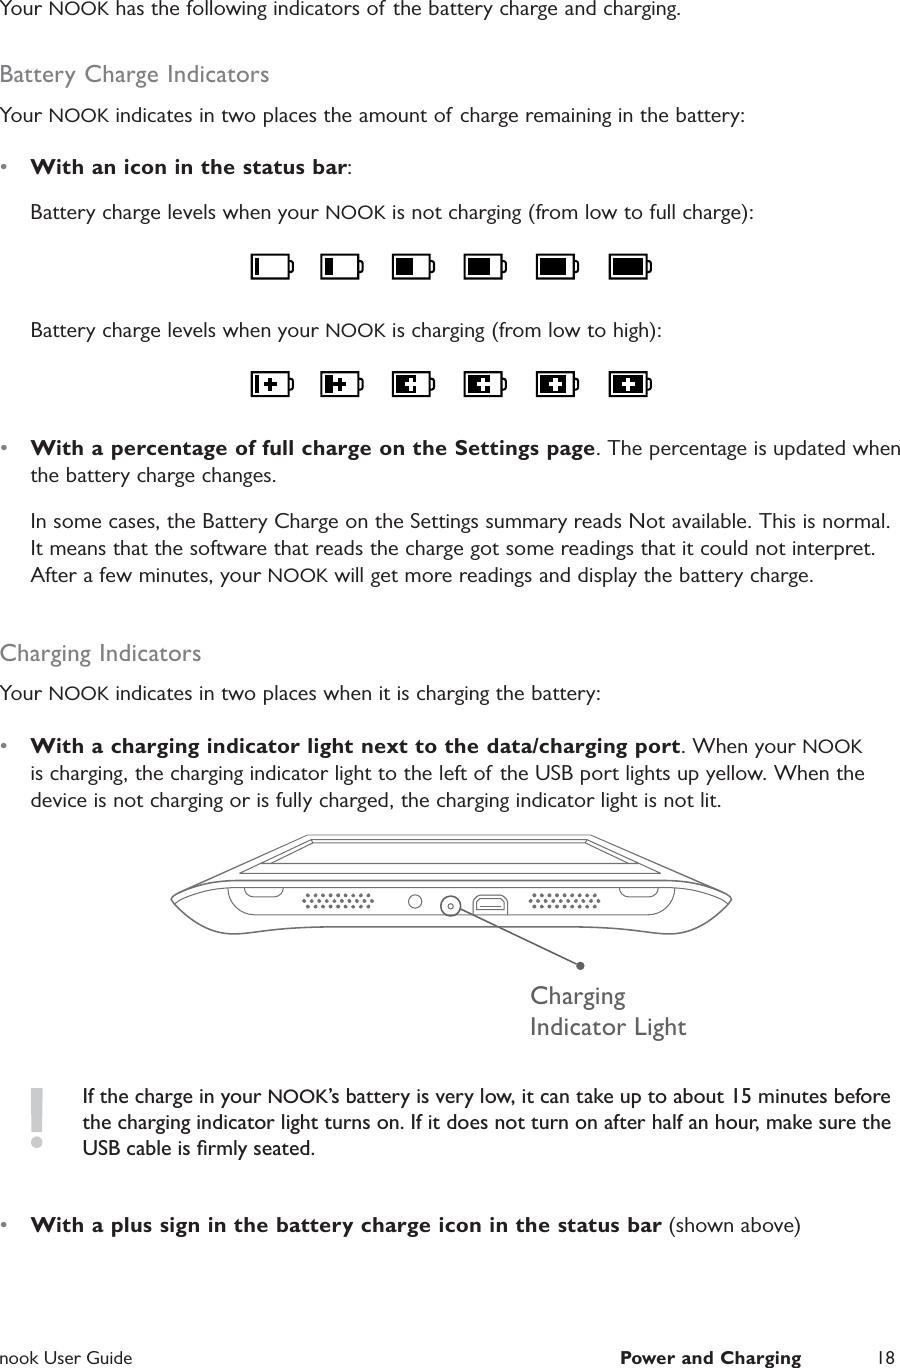  nook User Guide  Power and Charging 18Your NOOK has the following indicators of the battery charge and charging.Battery Charge IndicatorsYour NOOK indicates in two places the amount of charge remaining in the battery:•  With an icon in the status bar:Battery charge levels when your NOOK is not charging (from low to full charge):Battery charge levels when your NOOK is charging (from low to high):•  With a percentage of full charge on the Settings page. The percentage is updated when the battery charge changes.In some cases, the Battery Charge on the Settings summary reads Not available. This is normal. It means that the software that reads the charge got some readings that it could not interpret. After a few minutes, your NOOK will get more readings and display the battery charge.Charging IndicatorsYour NOOK indicates in two places when it is charging the battery:•  With a charging indicator light next to the data/charging port. When your NOOK is charging, the charging indicator light to the left of the USB port lights up yellow. When the device is not charging or is fully charged, the charging indicator light is not lit.ChargingIndicator LightIf the charge in your NOOK’s battery is very low, it can take up to about 15 minutes before the charging indicator light turns on. If it does not turn on after half an hour, make sure the USB cable is ﬁrmly seated.•  With a plus sign in the battery charge icon in the status bar (shown above)